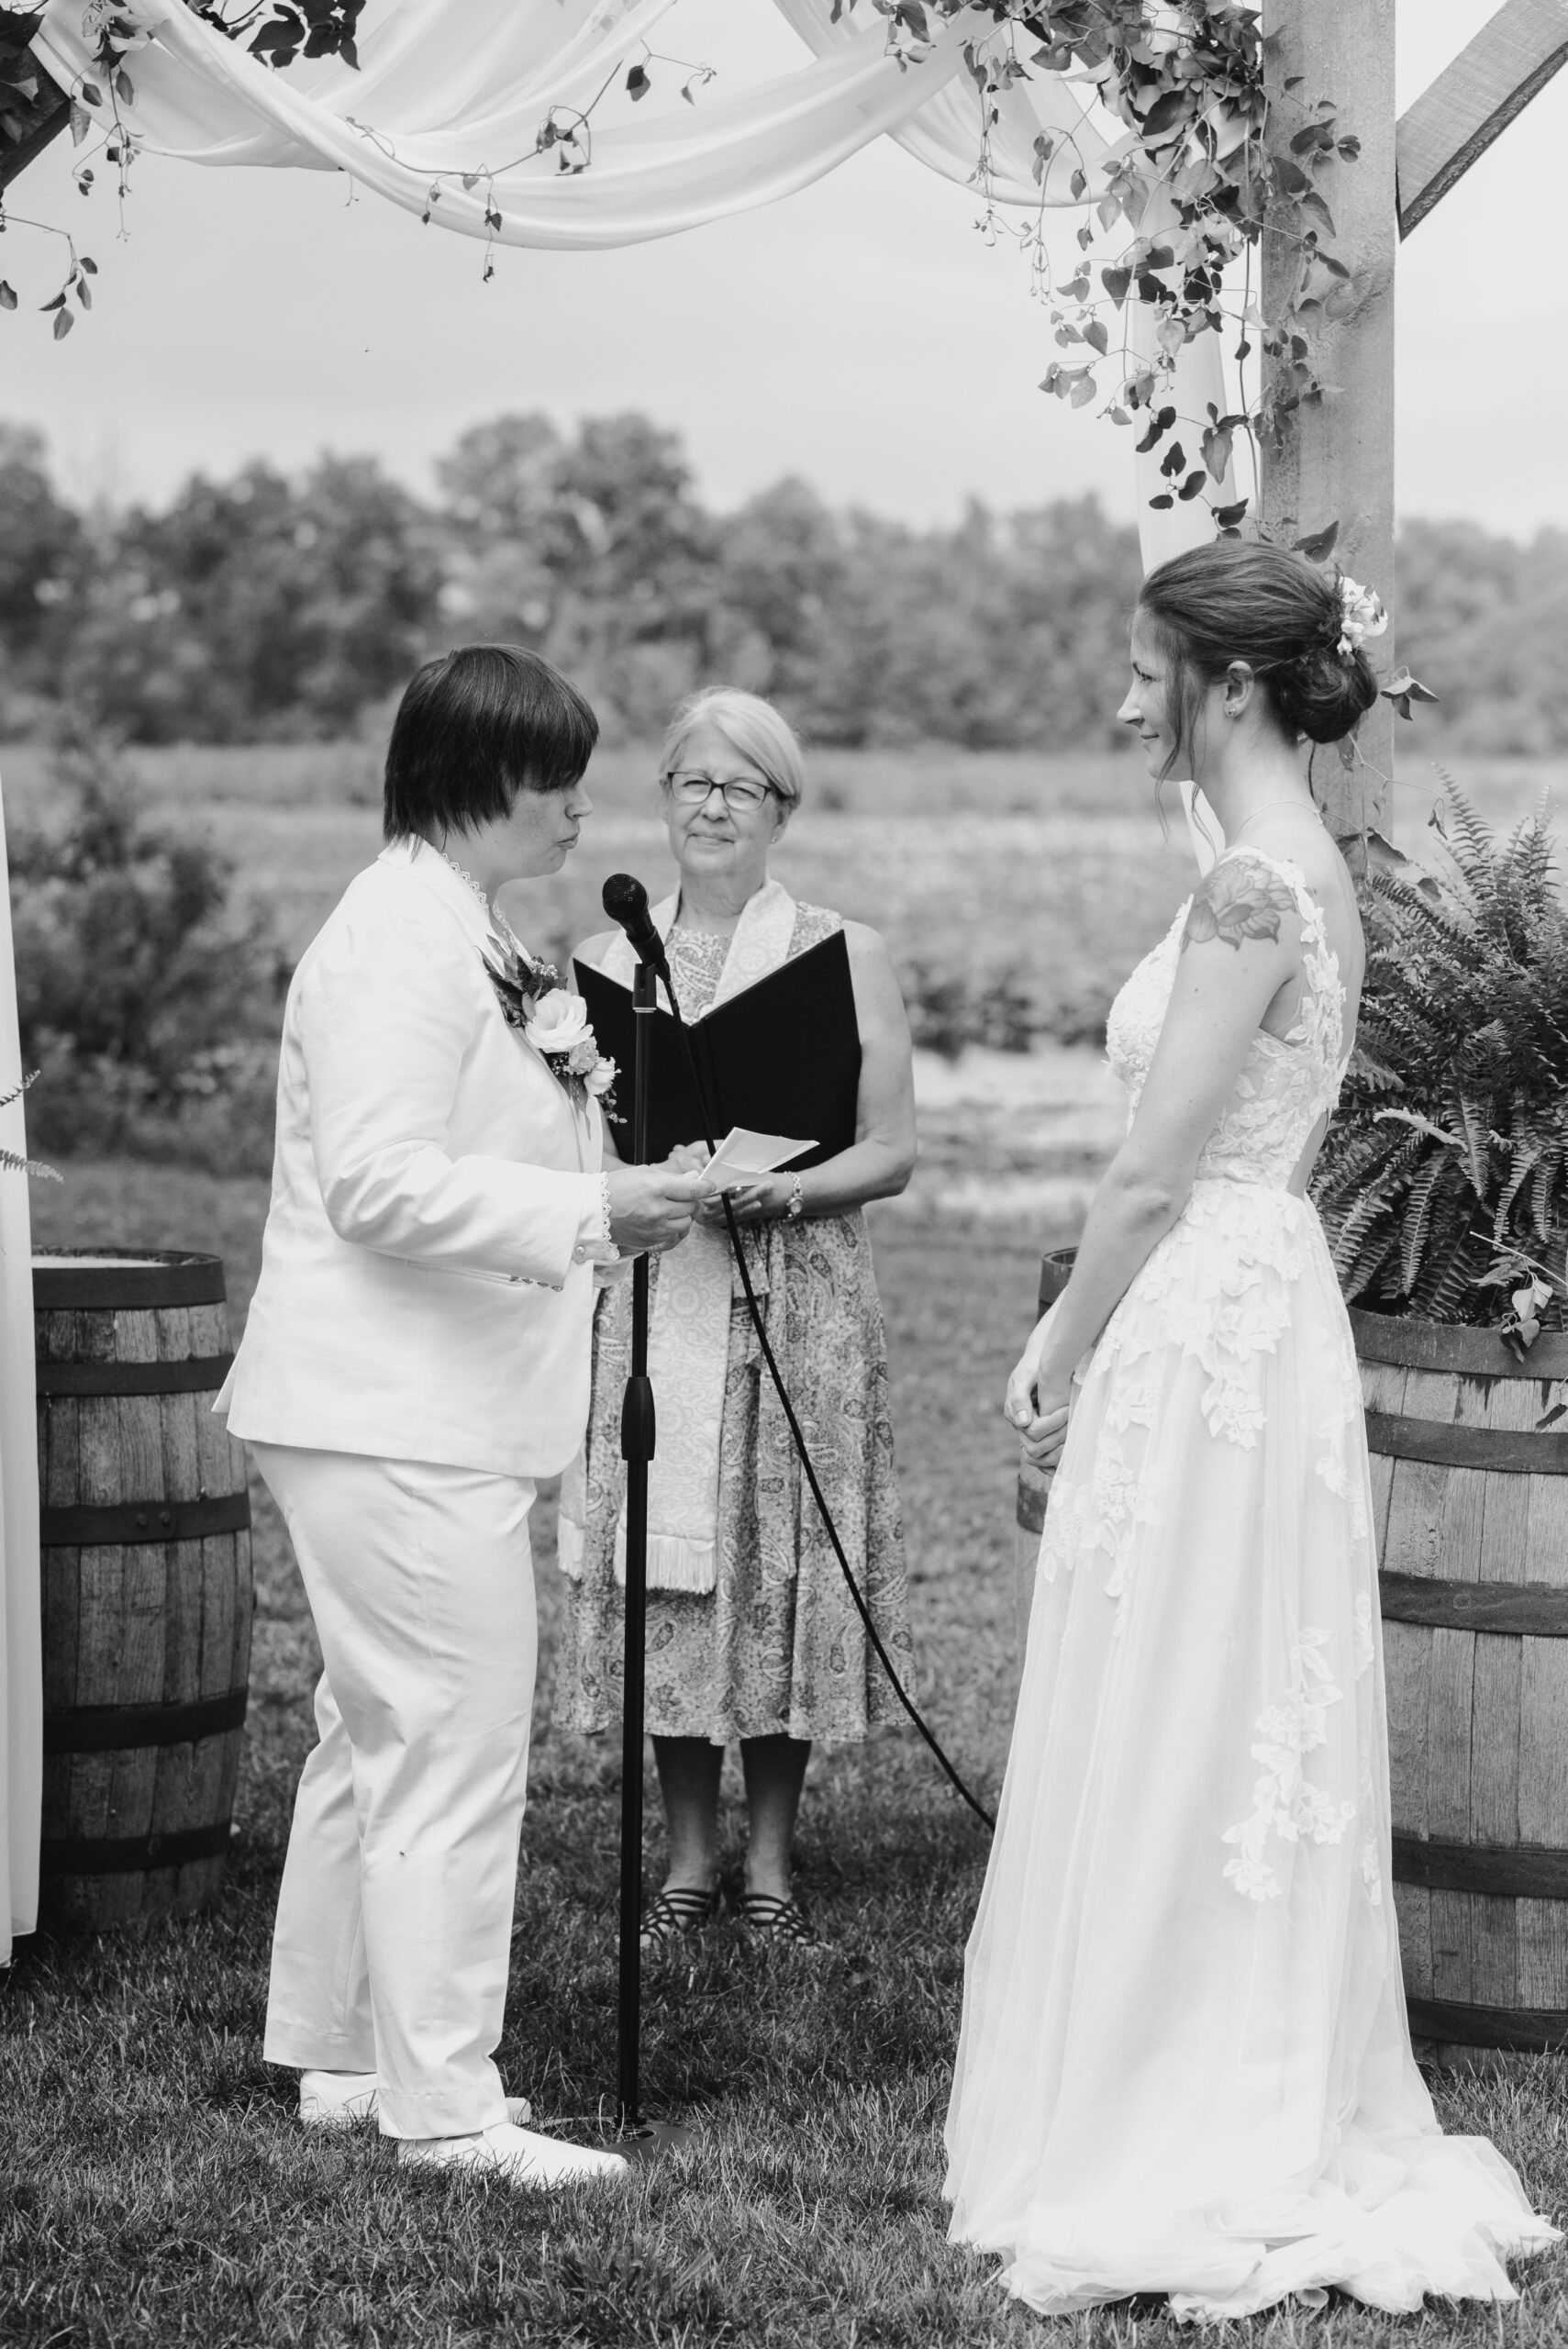 black and white image of two brides getting married during their backyard wedding ceremony one bride in j crew suit one bride in white wedding dress lgbtq wedding in lawton michigan photograped by queer wedding photographer Liv Lyszyk Photography